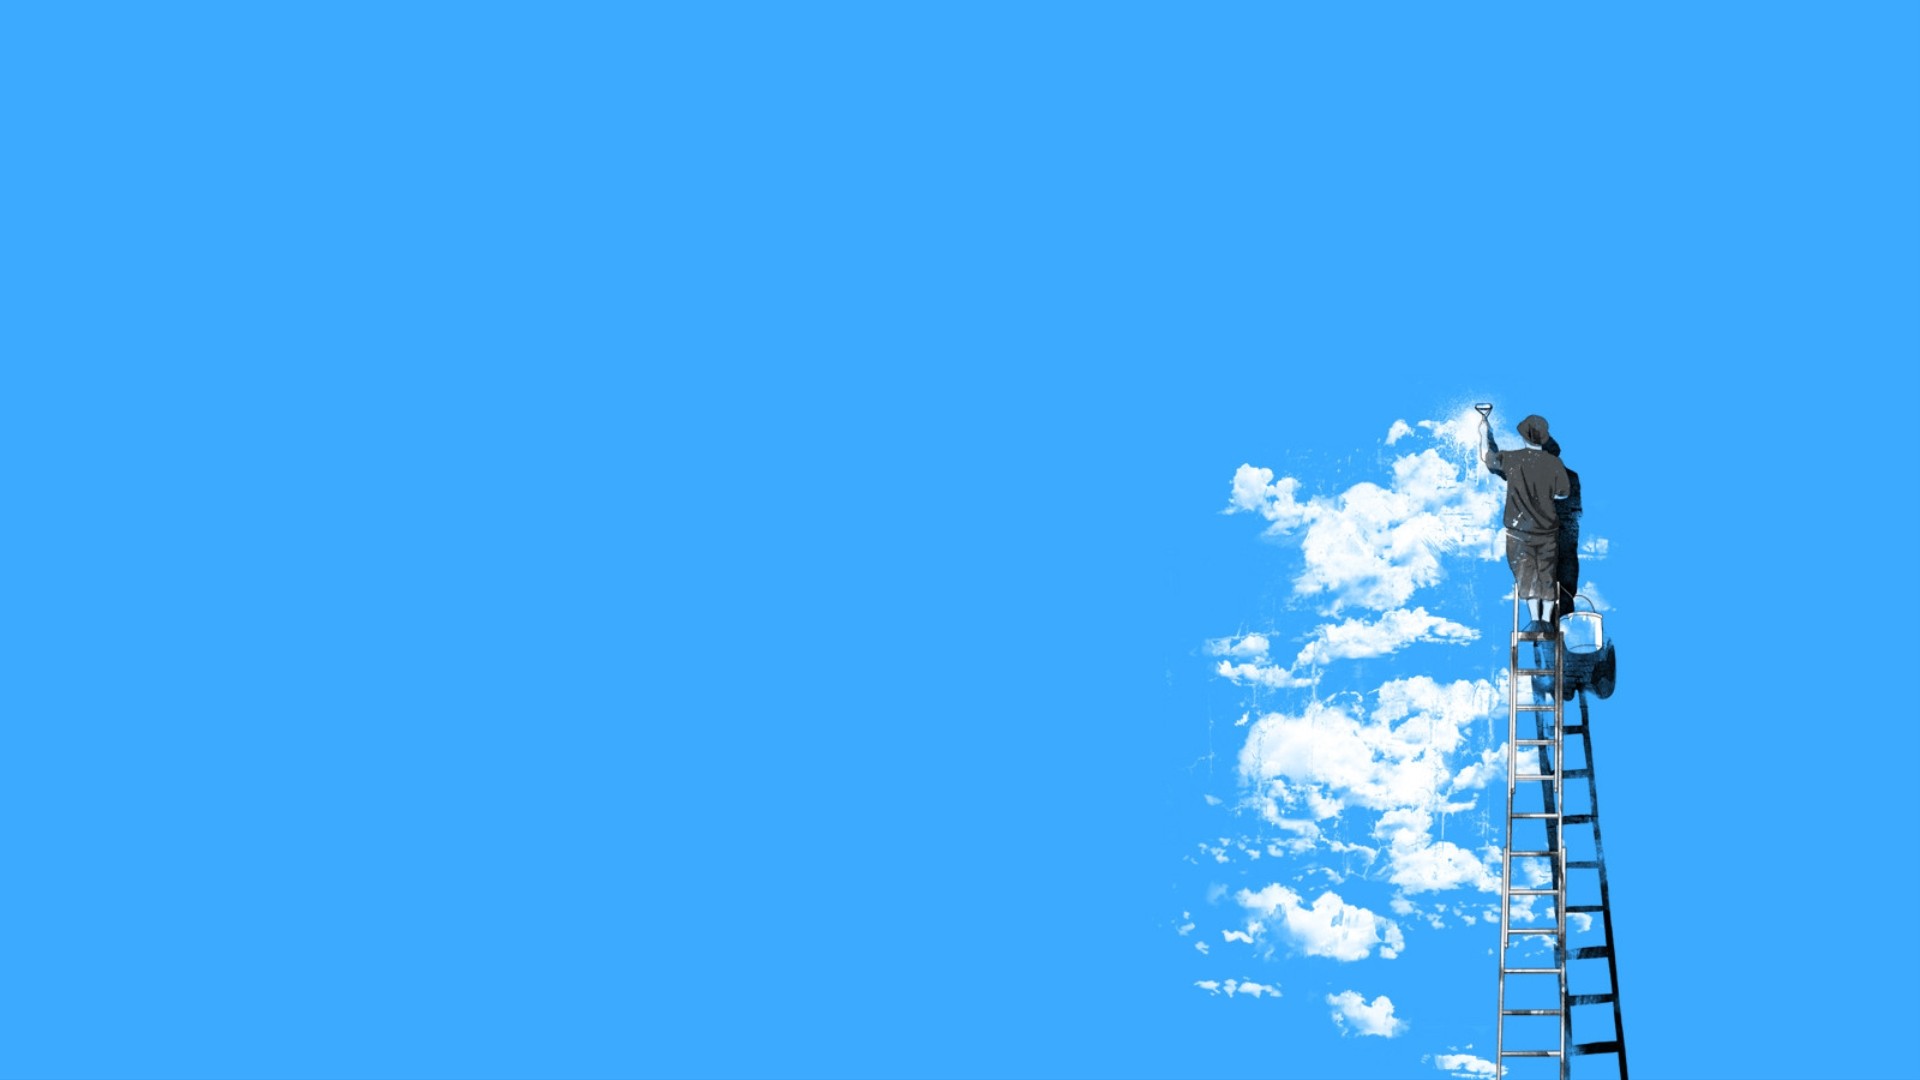 General 1920x1080 minimalism simple background sky ladder artwork cyan cyan background clouds paint can paint brushes paint roller painting